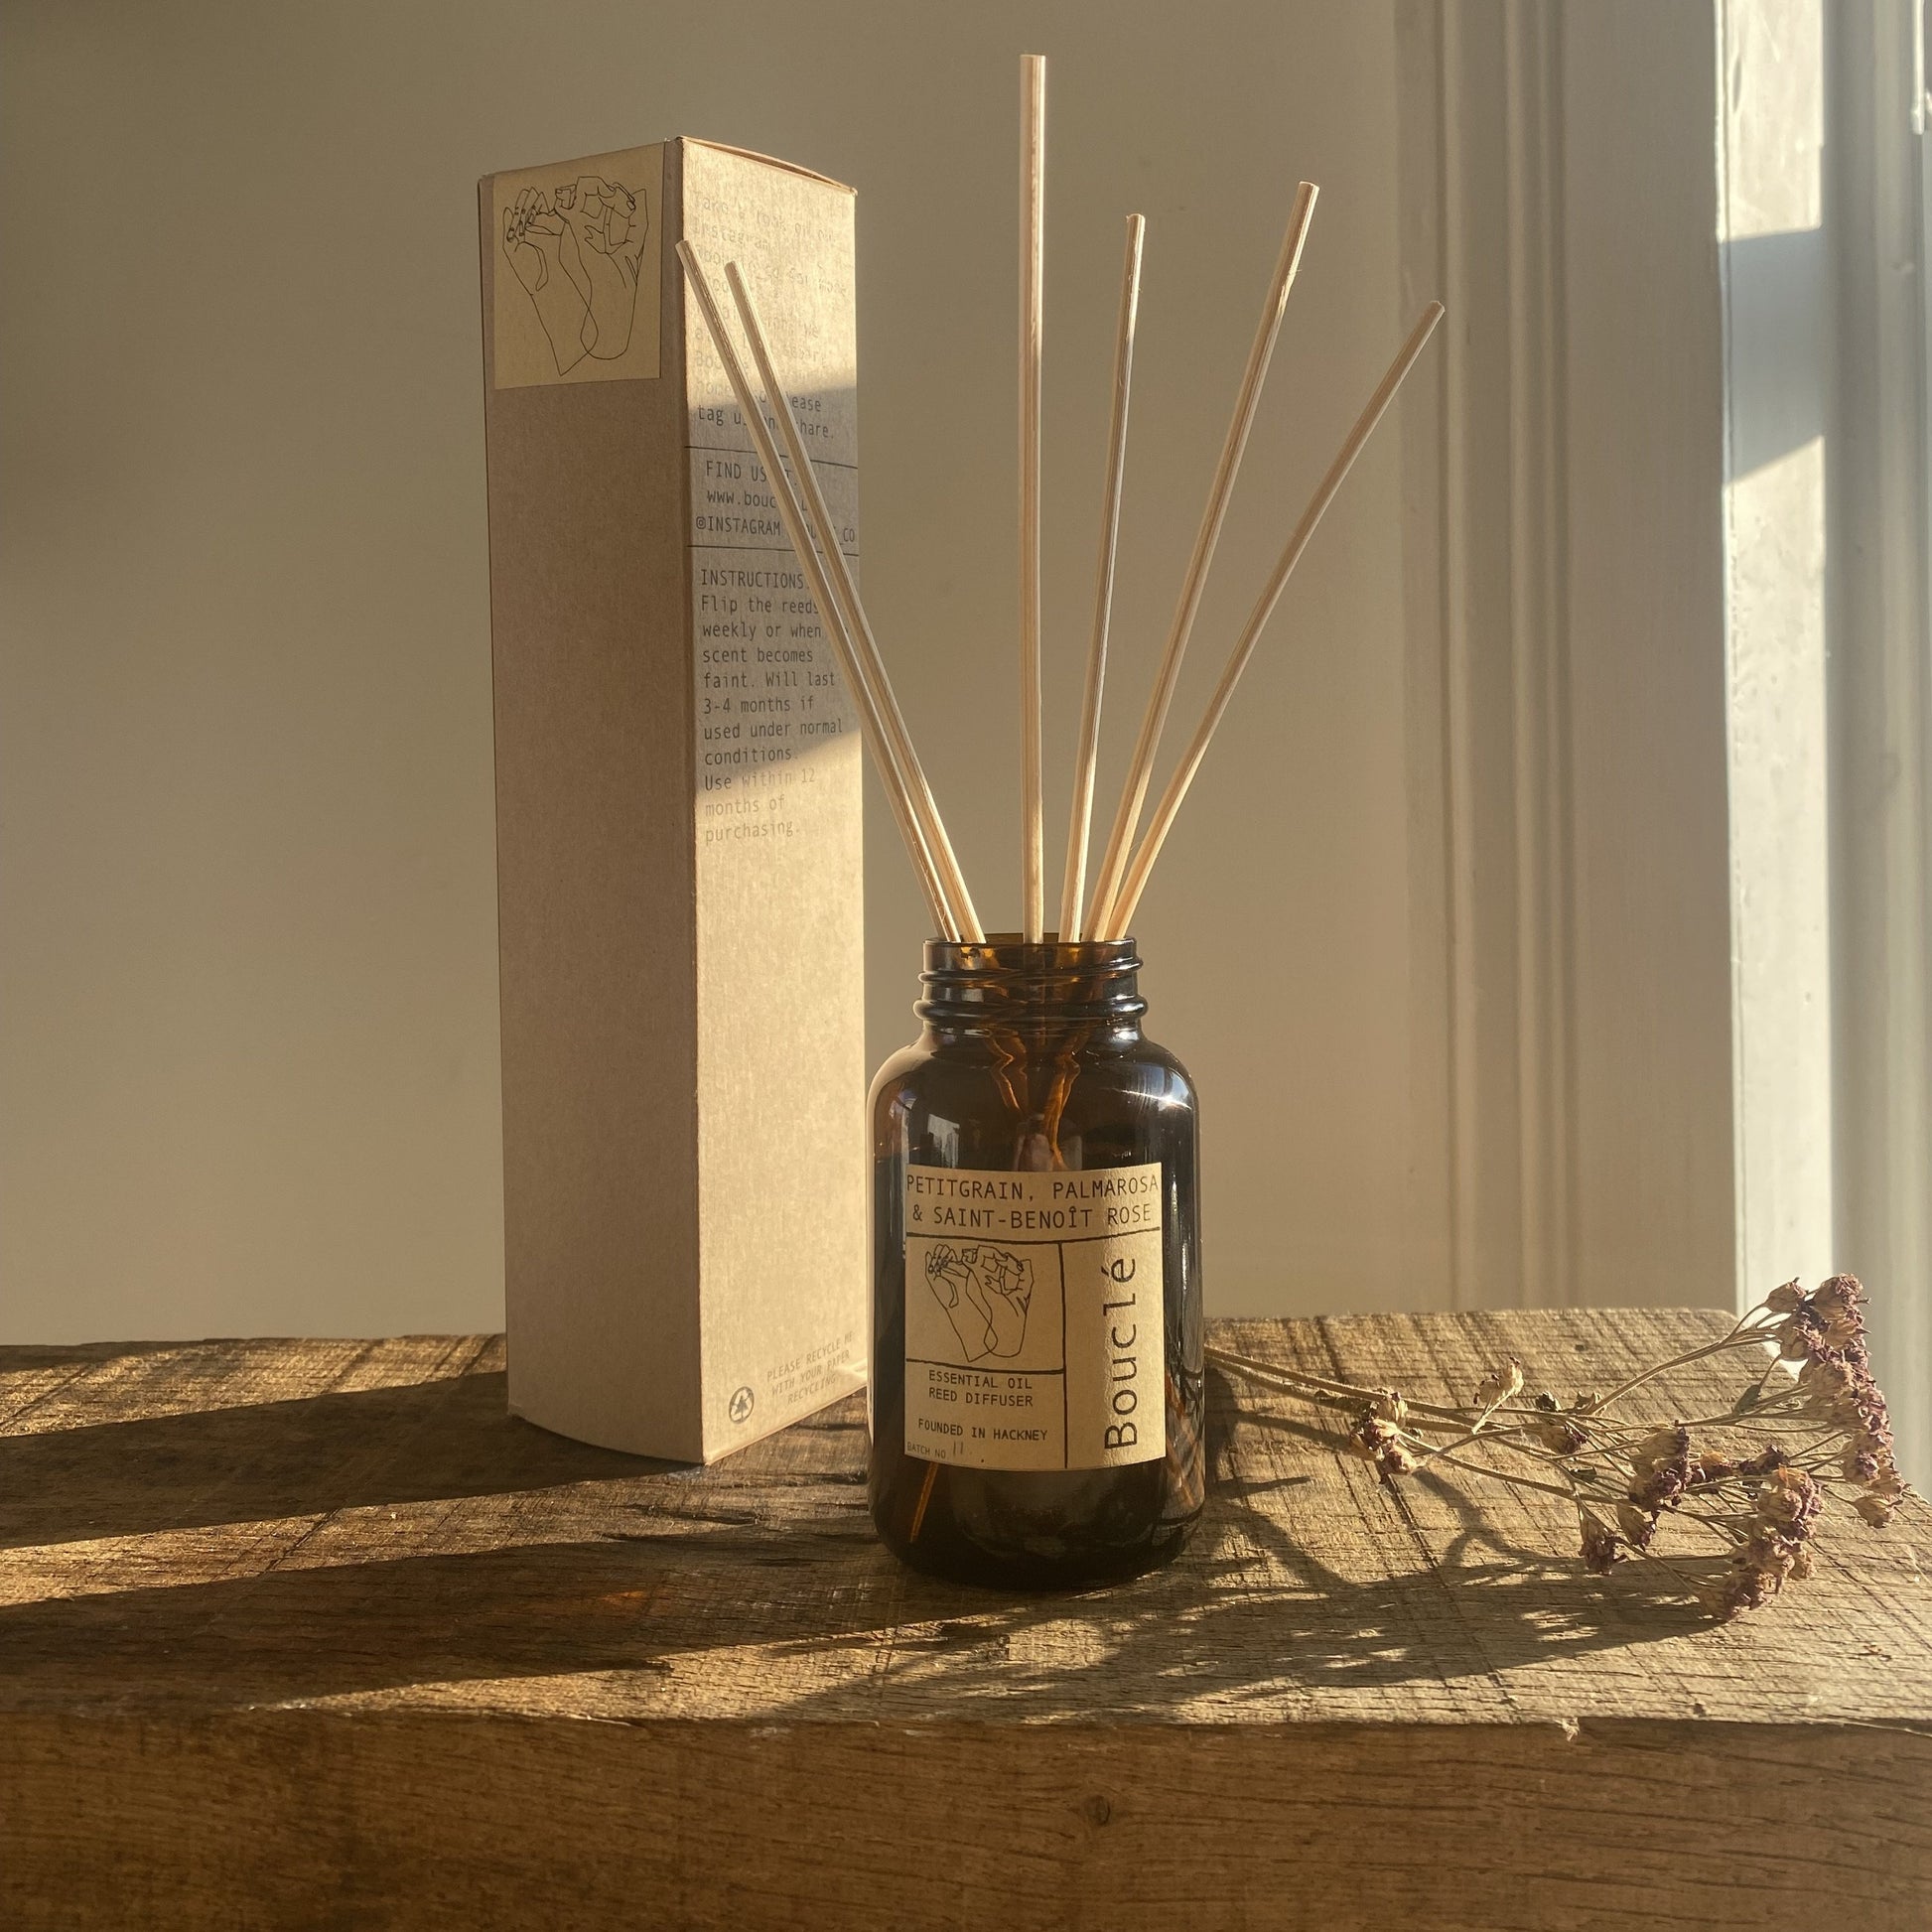 Bouclé London essential oil rattan reed diffuser. Vegan and aromatherapy grade it is in an amber glass bottle.